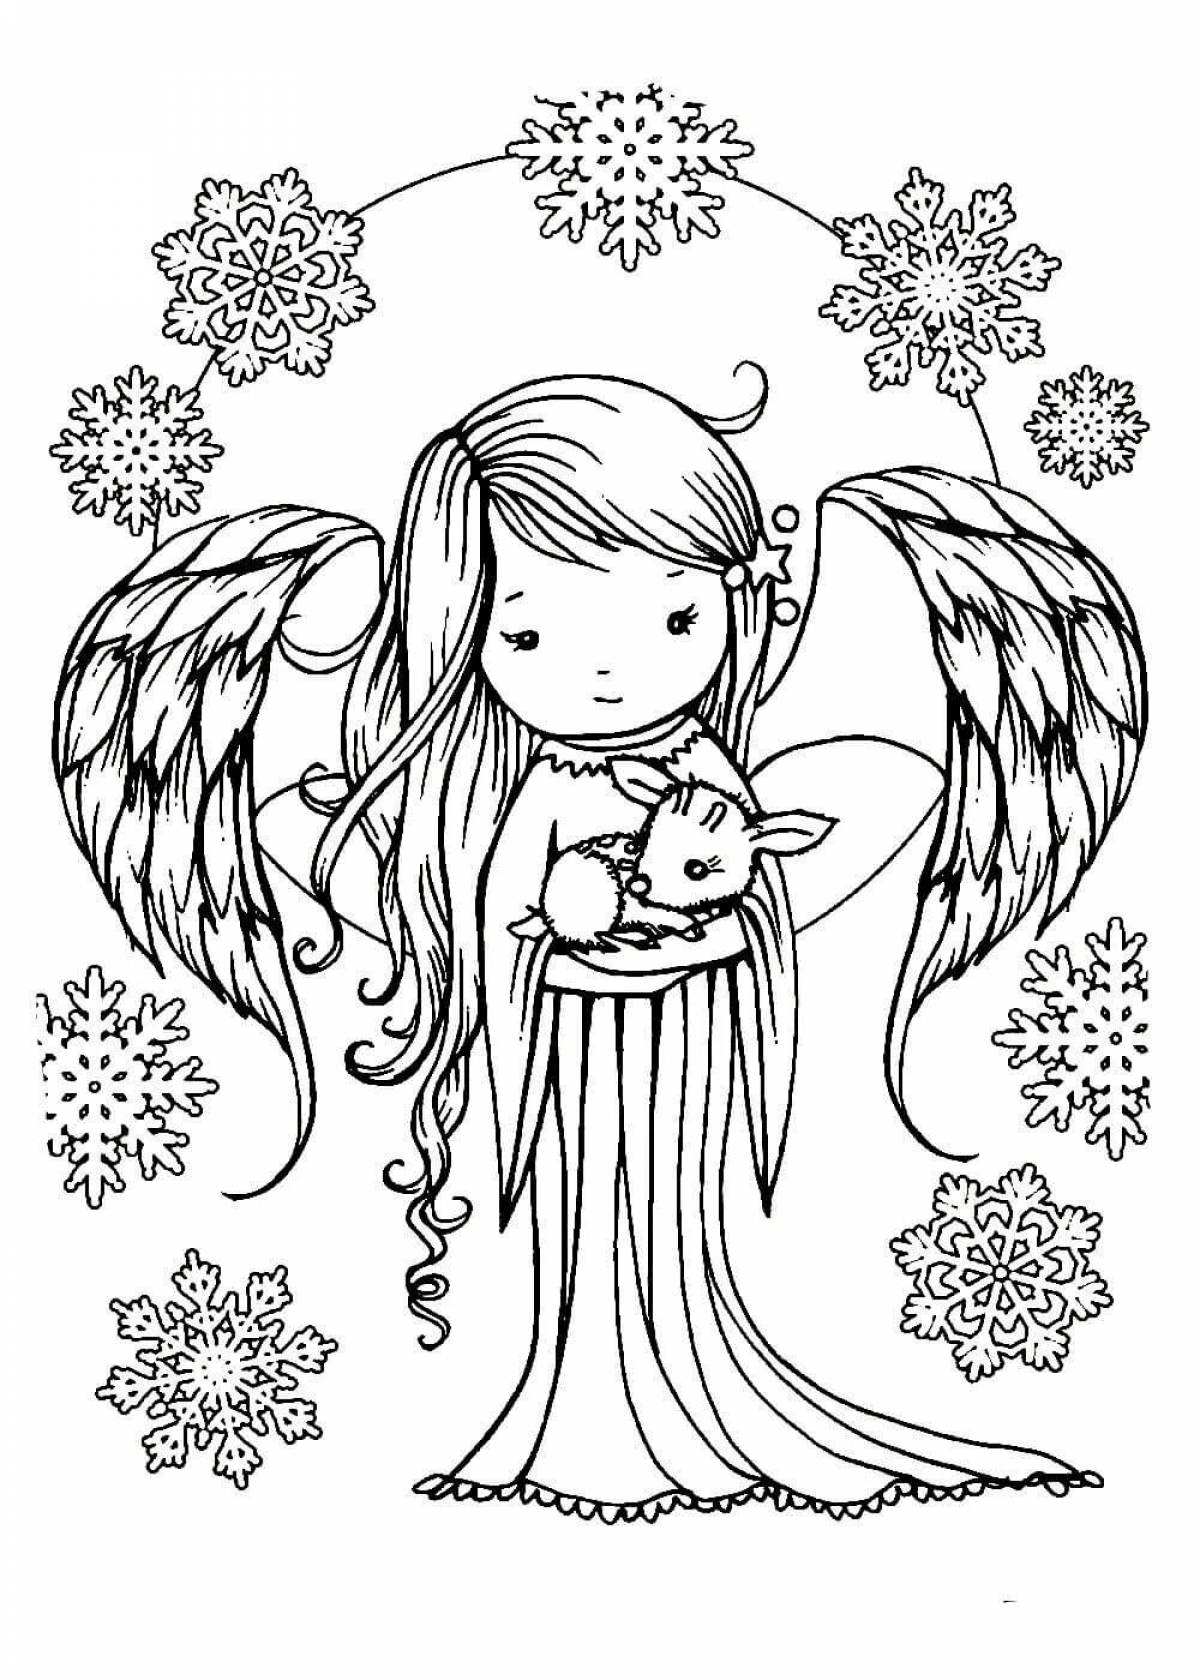 Excellent angel coloring by numbers